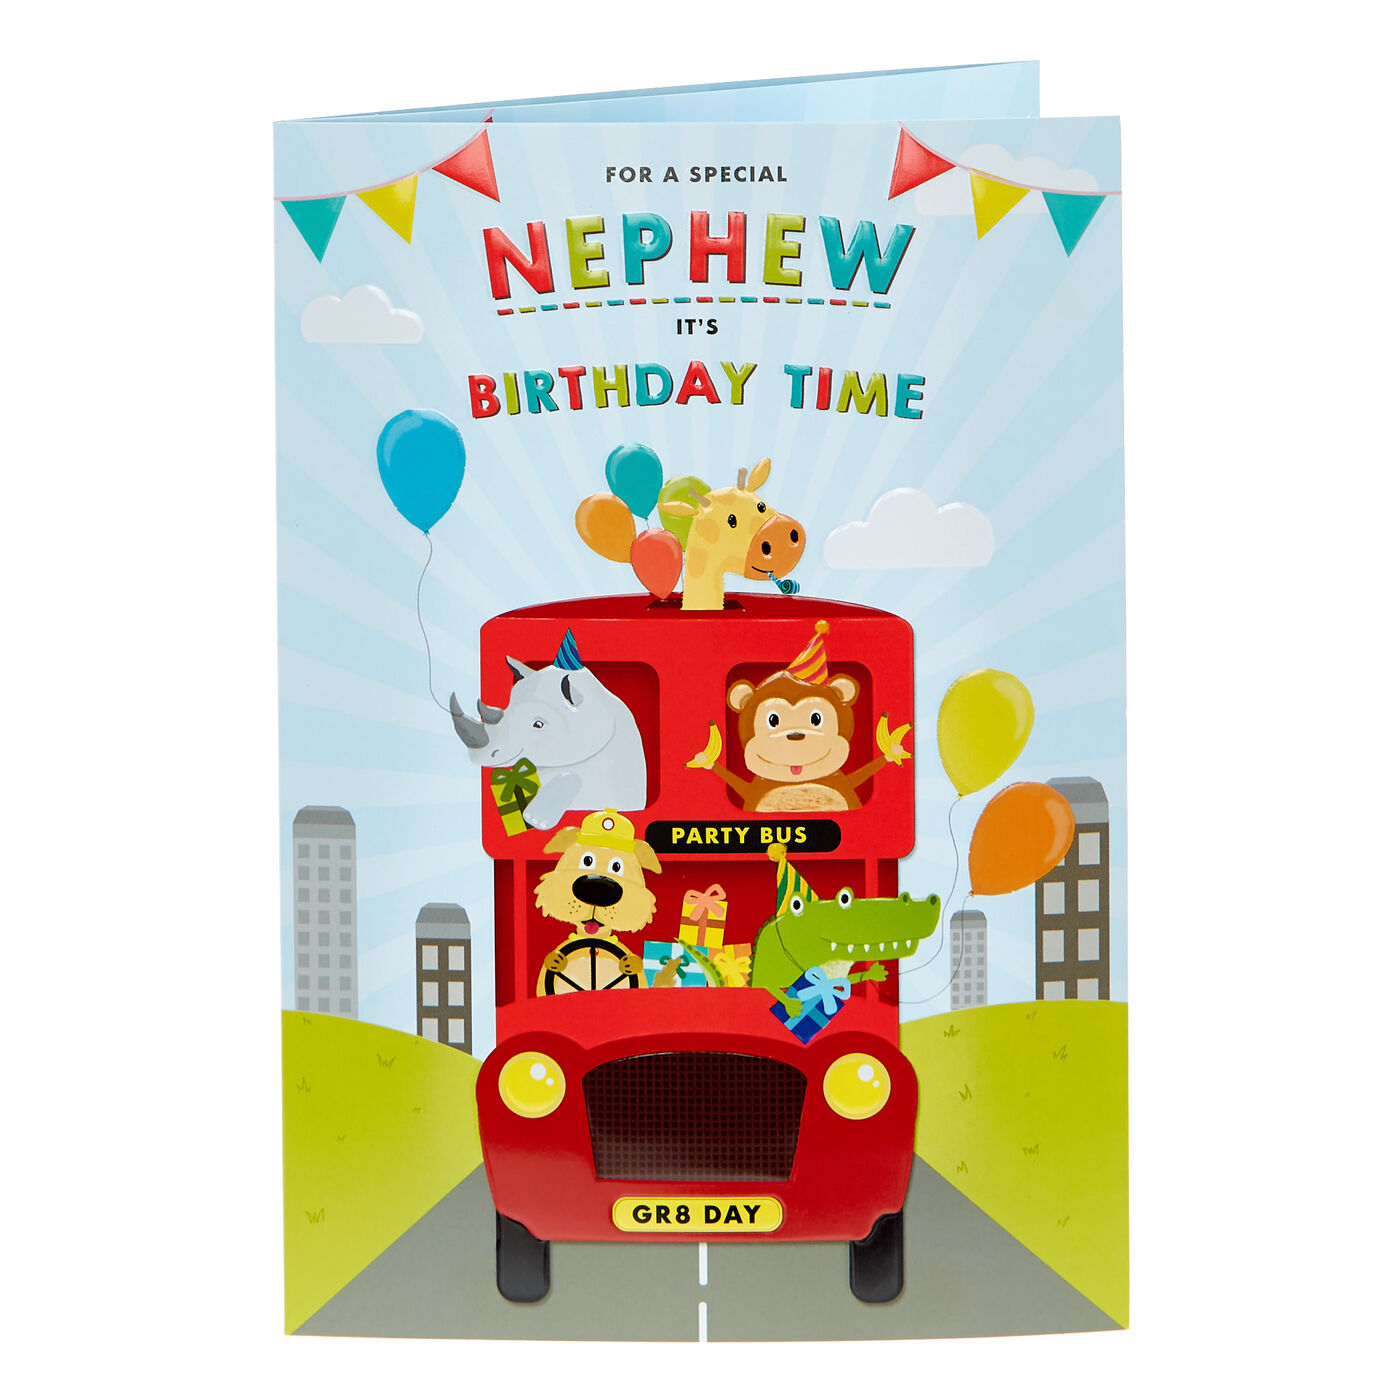 Buy Birthday Card - Nephew Party Bus for GBP  | Card Factory UK